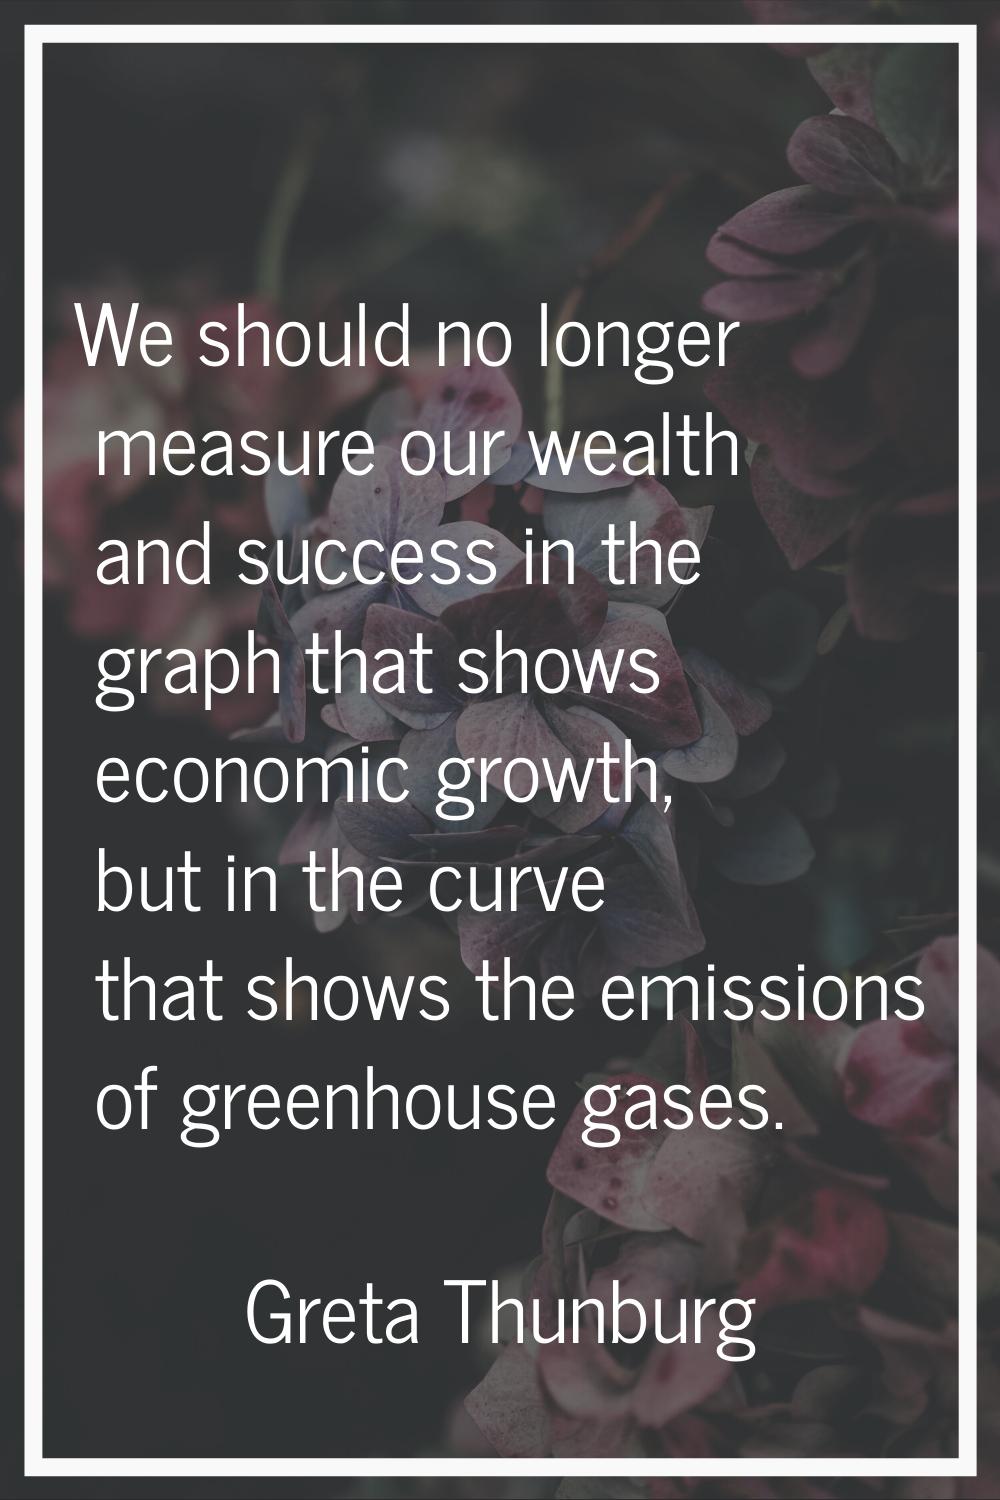 We should no longer measure our wealth and success in the graph that shows economic growth, but in 